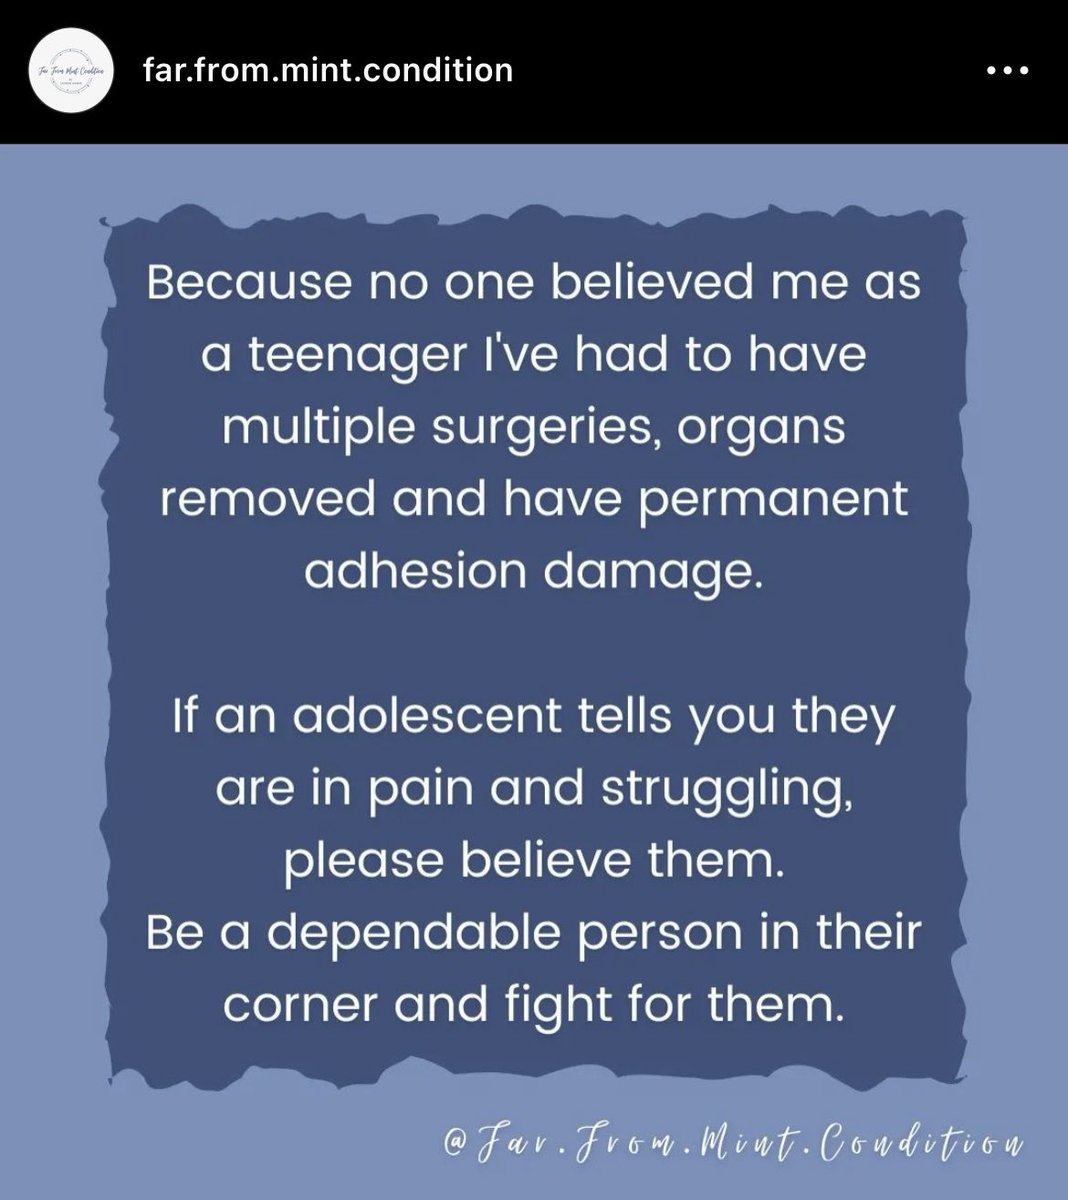 💯🔥So important, even if it’s not your child- please listen and help them have a voice. TY.🫂♥️
#chronicpain #chronicpainwarrior #chronicillness #chronicillnesswarrior #chronicfatigue #nausea #anemia #stomachpain #stomachproblems #endometriosis #fibromyalgia #awareness #advocacy